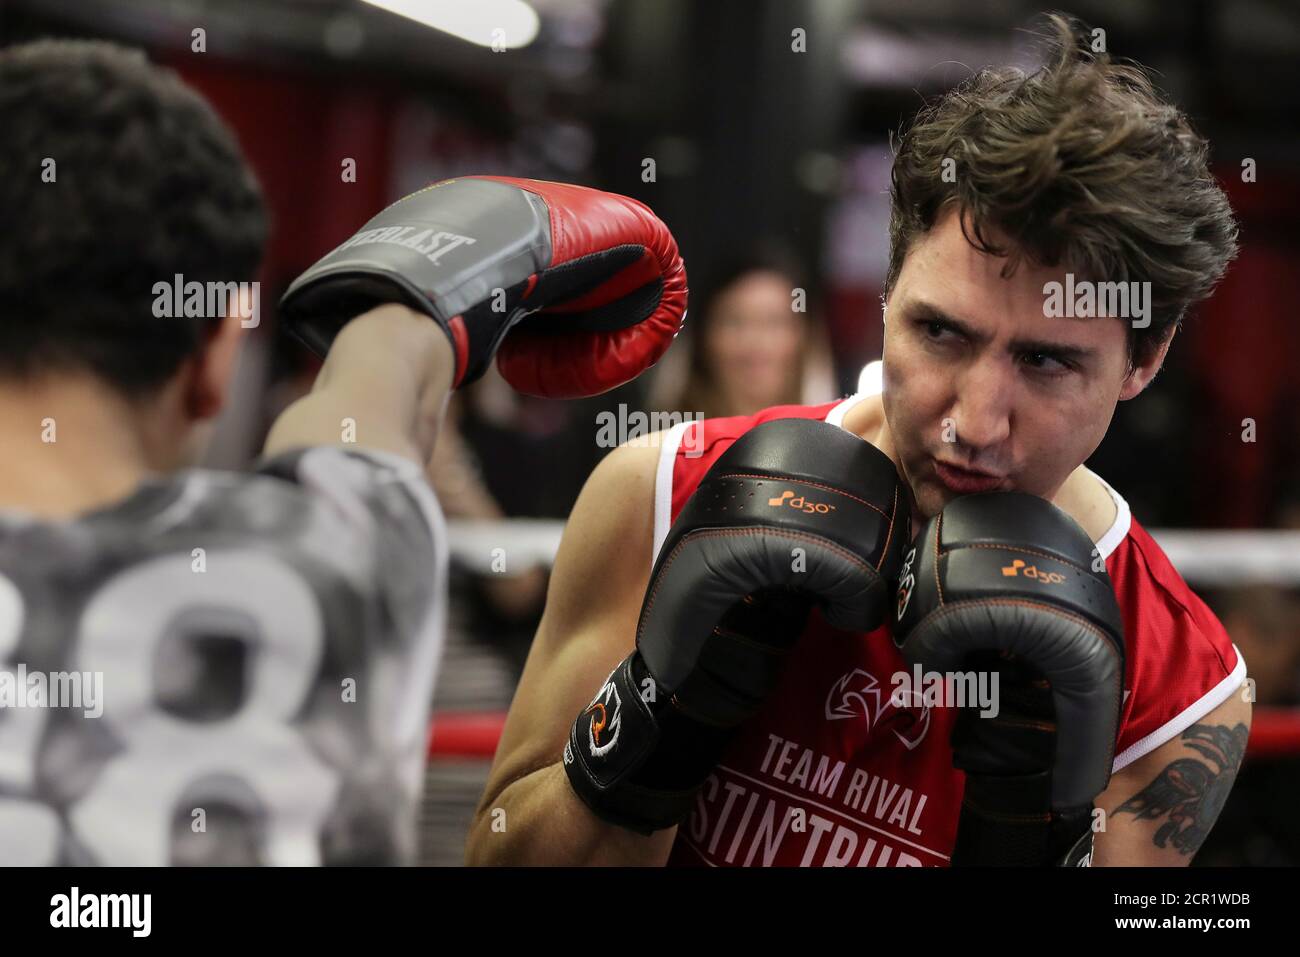 Canadian Prime Minister Justin Trudeau dodges a punch as he spars in the ring at Gleason's Boxing Gym in the Brooklyn borough of New York, U.S., April 21, 2016. REUTERS/Carlo Allegri     TPX IMAGES OF THE DAY Stock Photo